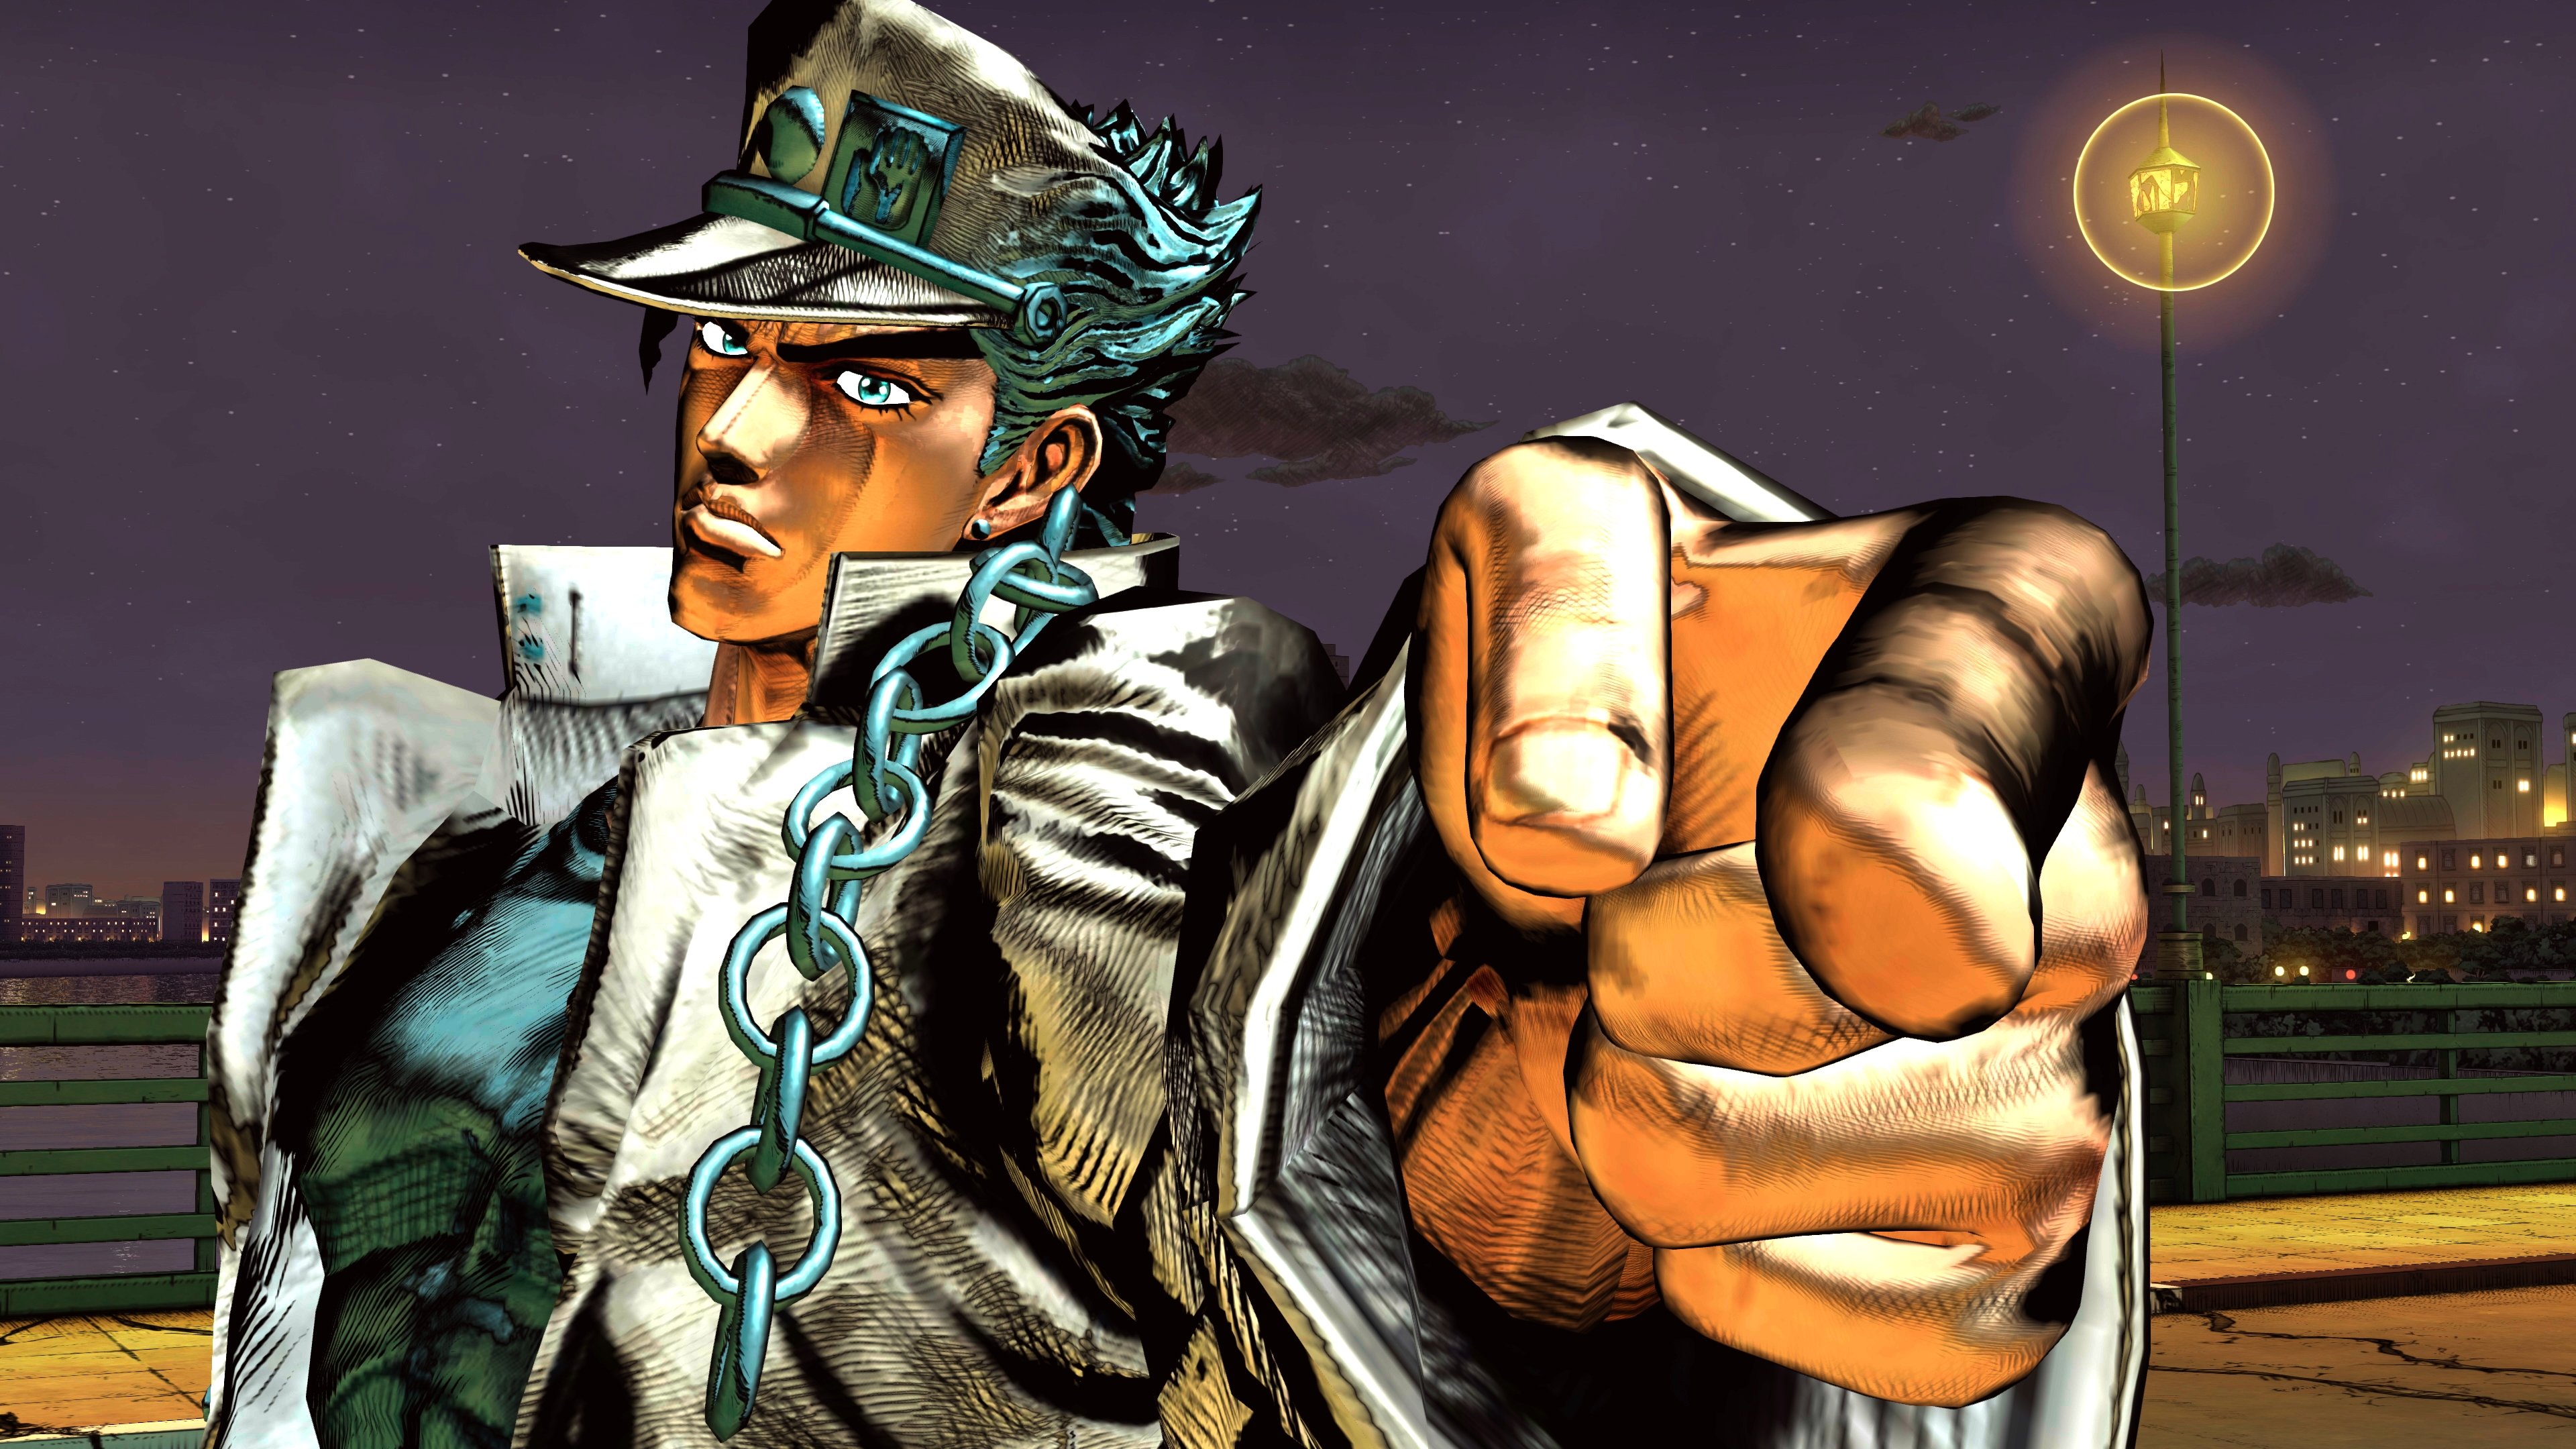 what is the most op character of jojo's all star battle R?/¿Cual